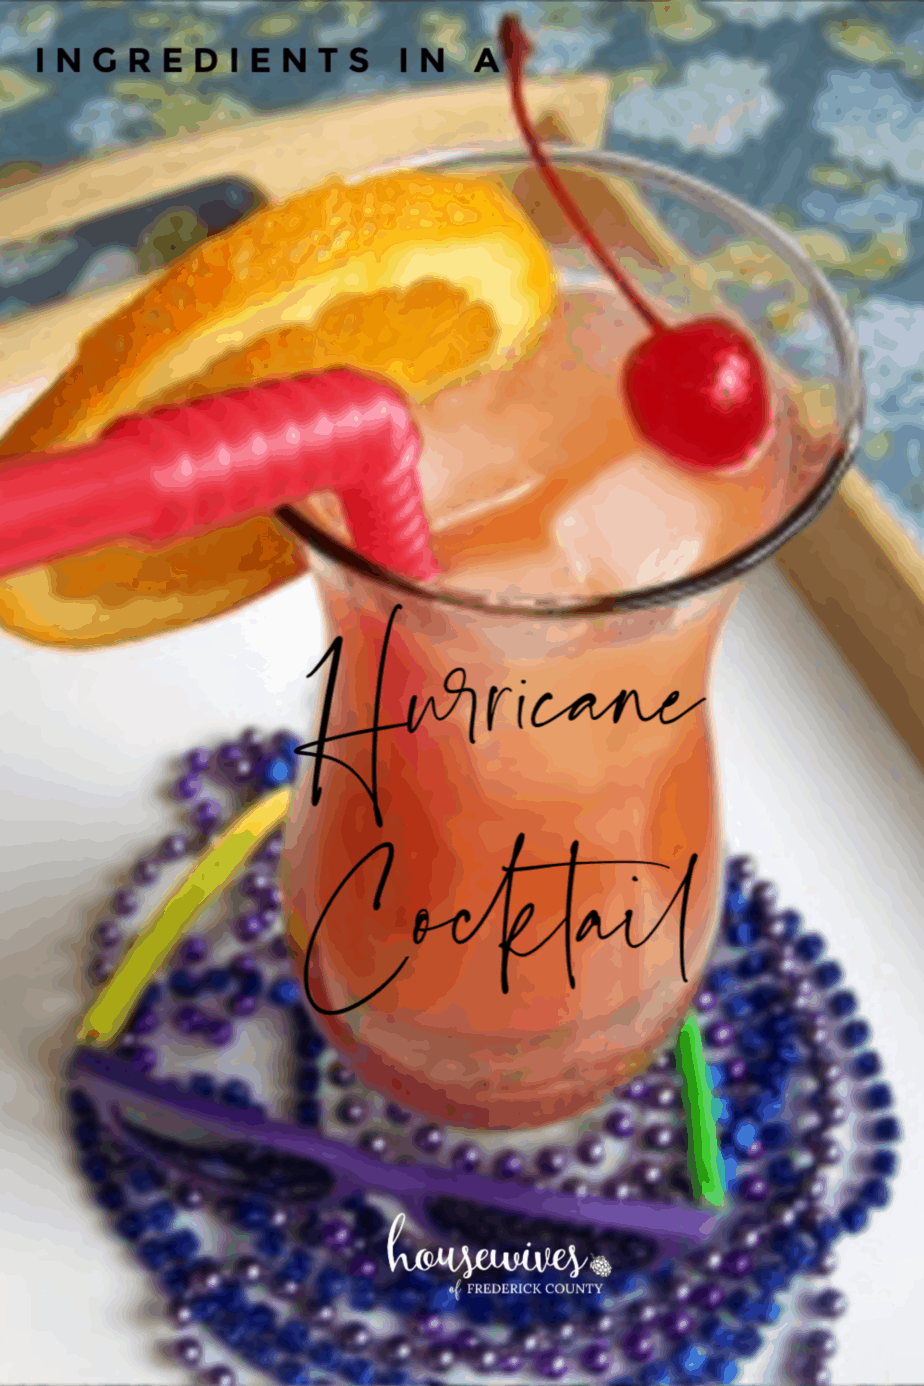 Hurricane Cocktail Recipe The Housewives Hurricane Housewives Of Frederick County